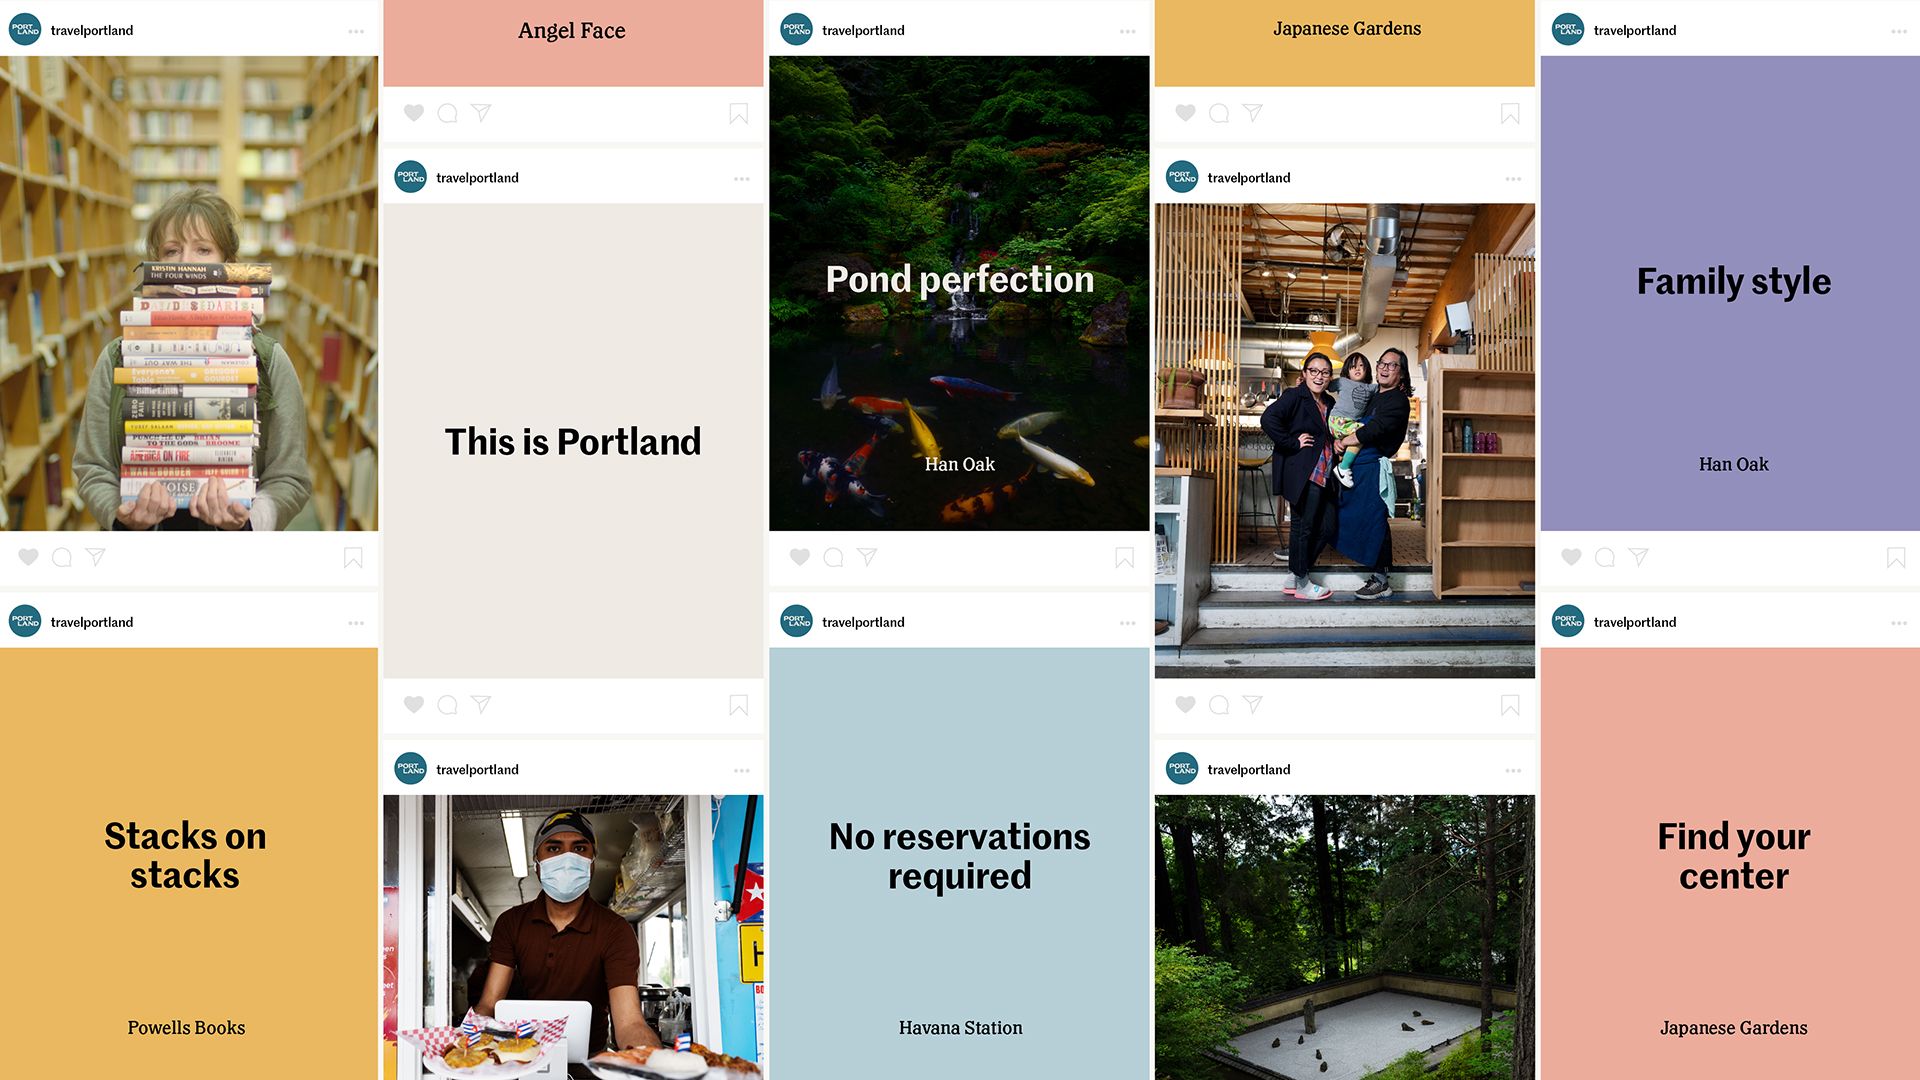 Collage of several campaingn spots on instagam. Stacks on stacks - Powell Books. Pond Perfection - Han Oak. No reservations required - Havana Station. Family style - Han Oak. Find your center - Japanese Gardens